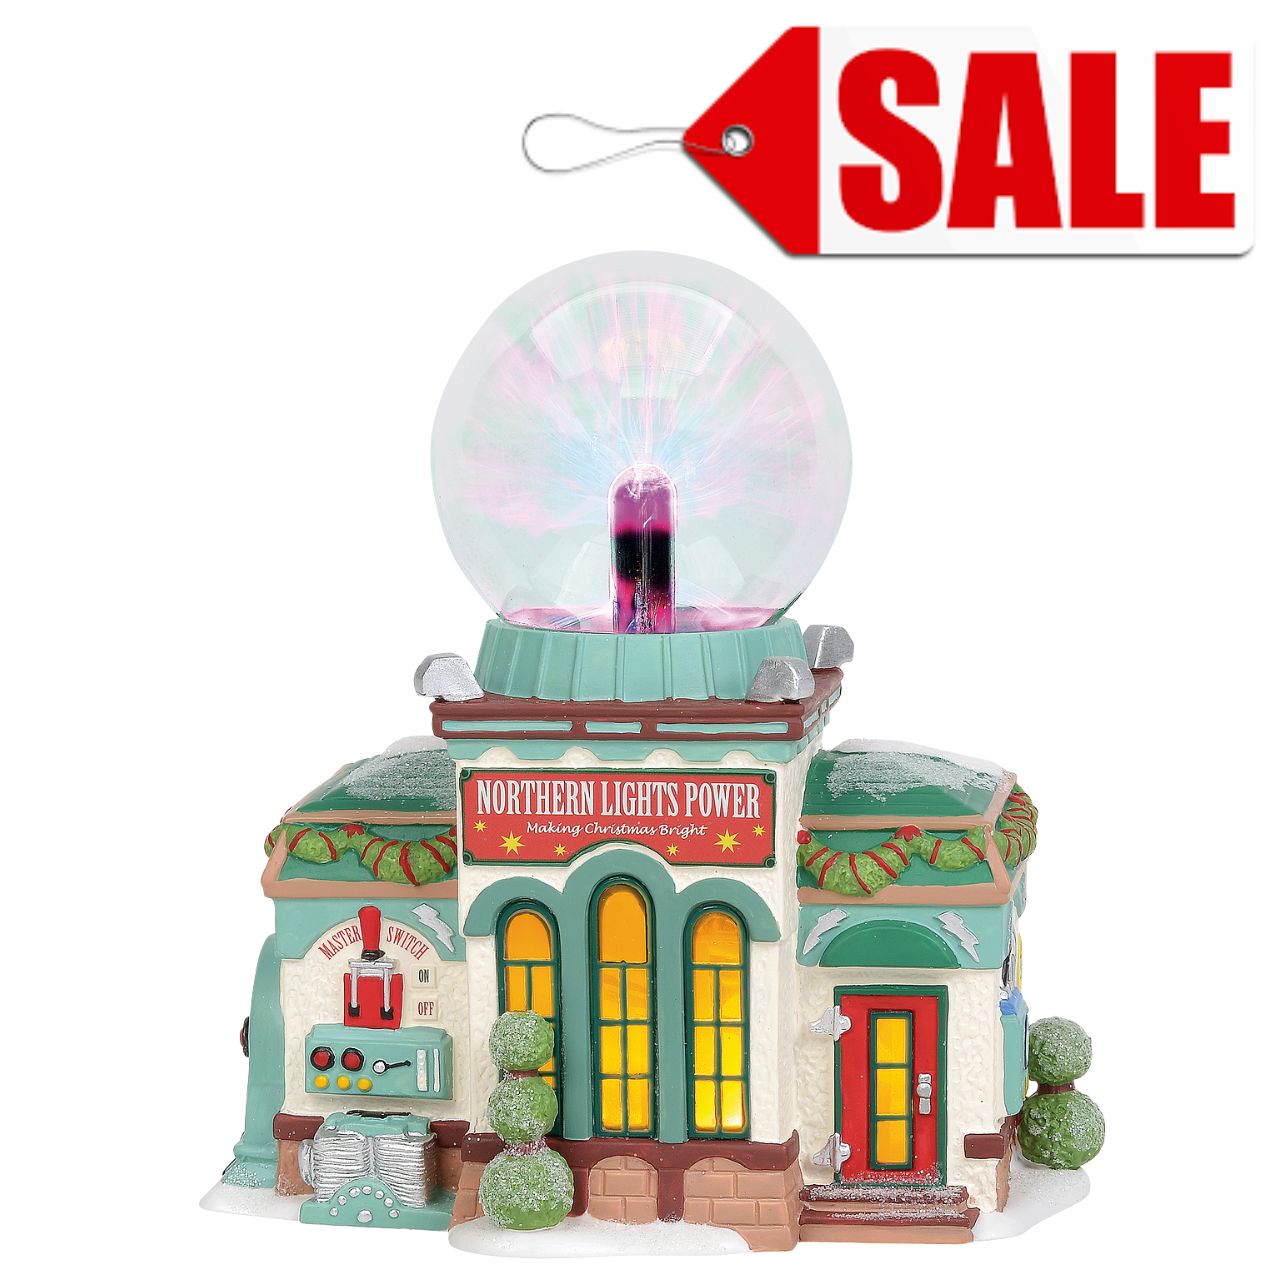 Department 56 North Pole Village Northern Lights Power Lit Building  Running a toy workshop around the clock uses a lot of electricity. Thankfully for Santa, elf scientists have harnessed the power of the Northern Lights into a limitless source of clean energy. Features a plasma globe creating electric light effect. Includes 3-pin plug.